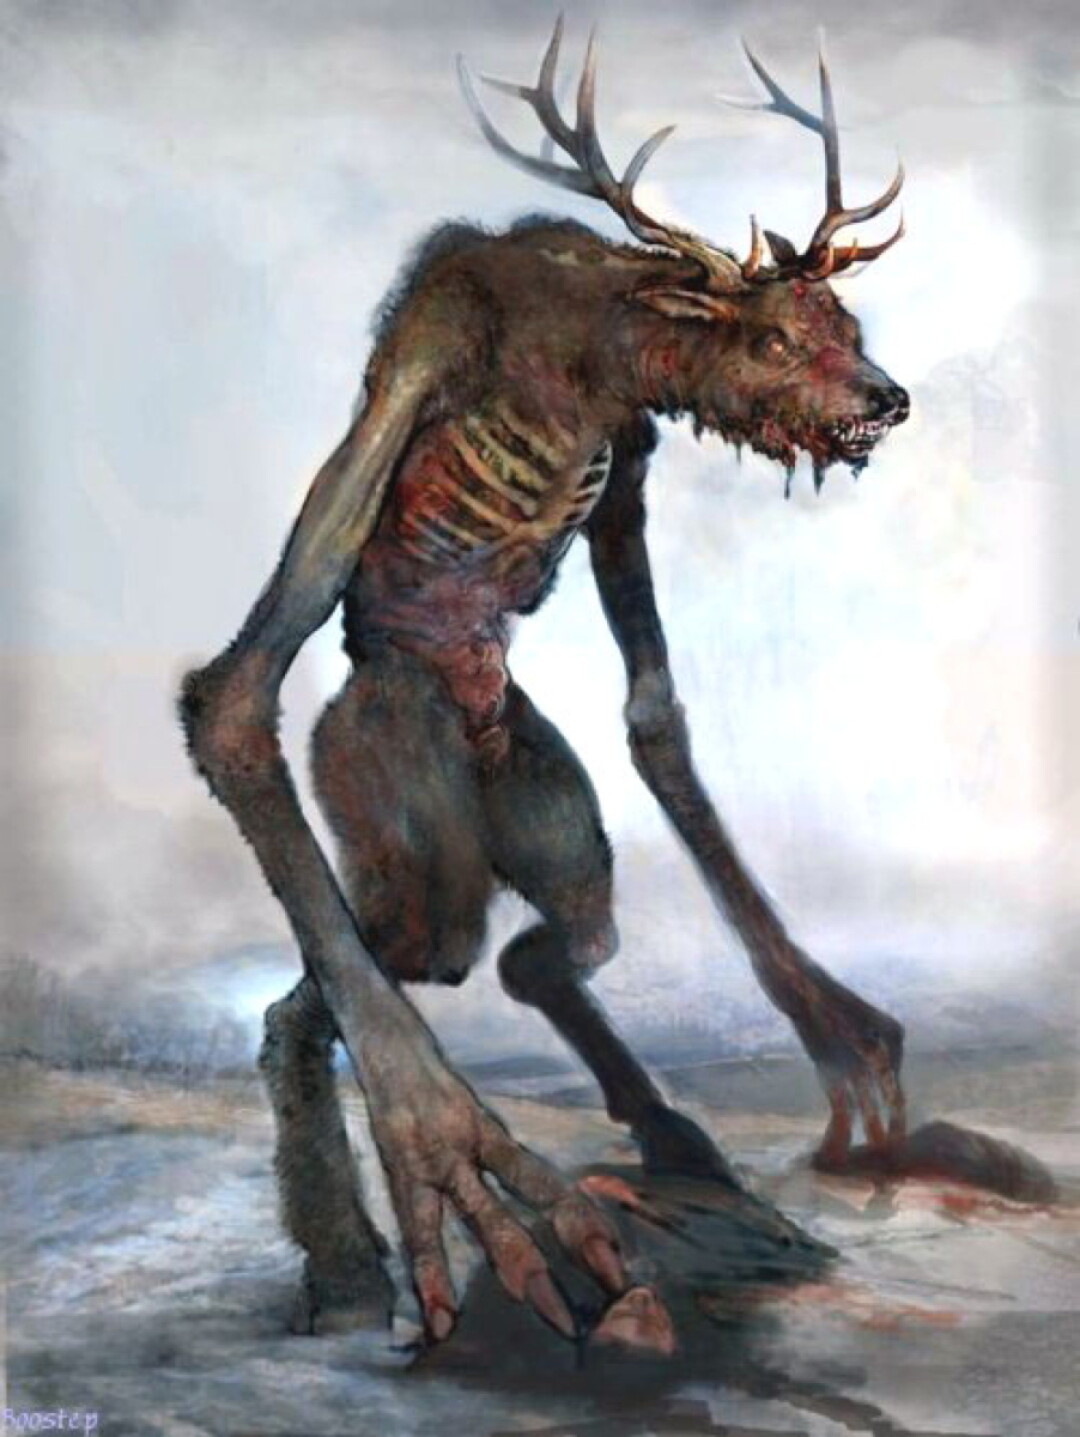 Behold the freaky zombie deer thing of legend!